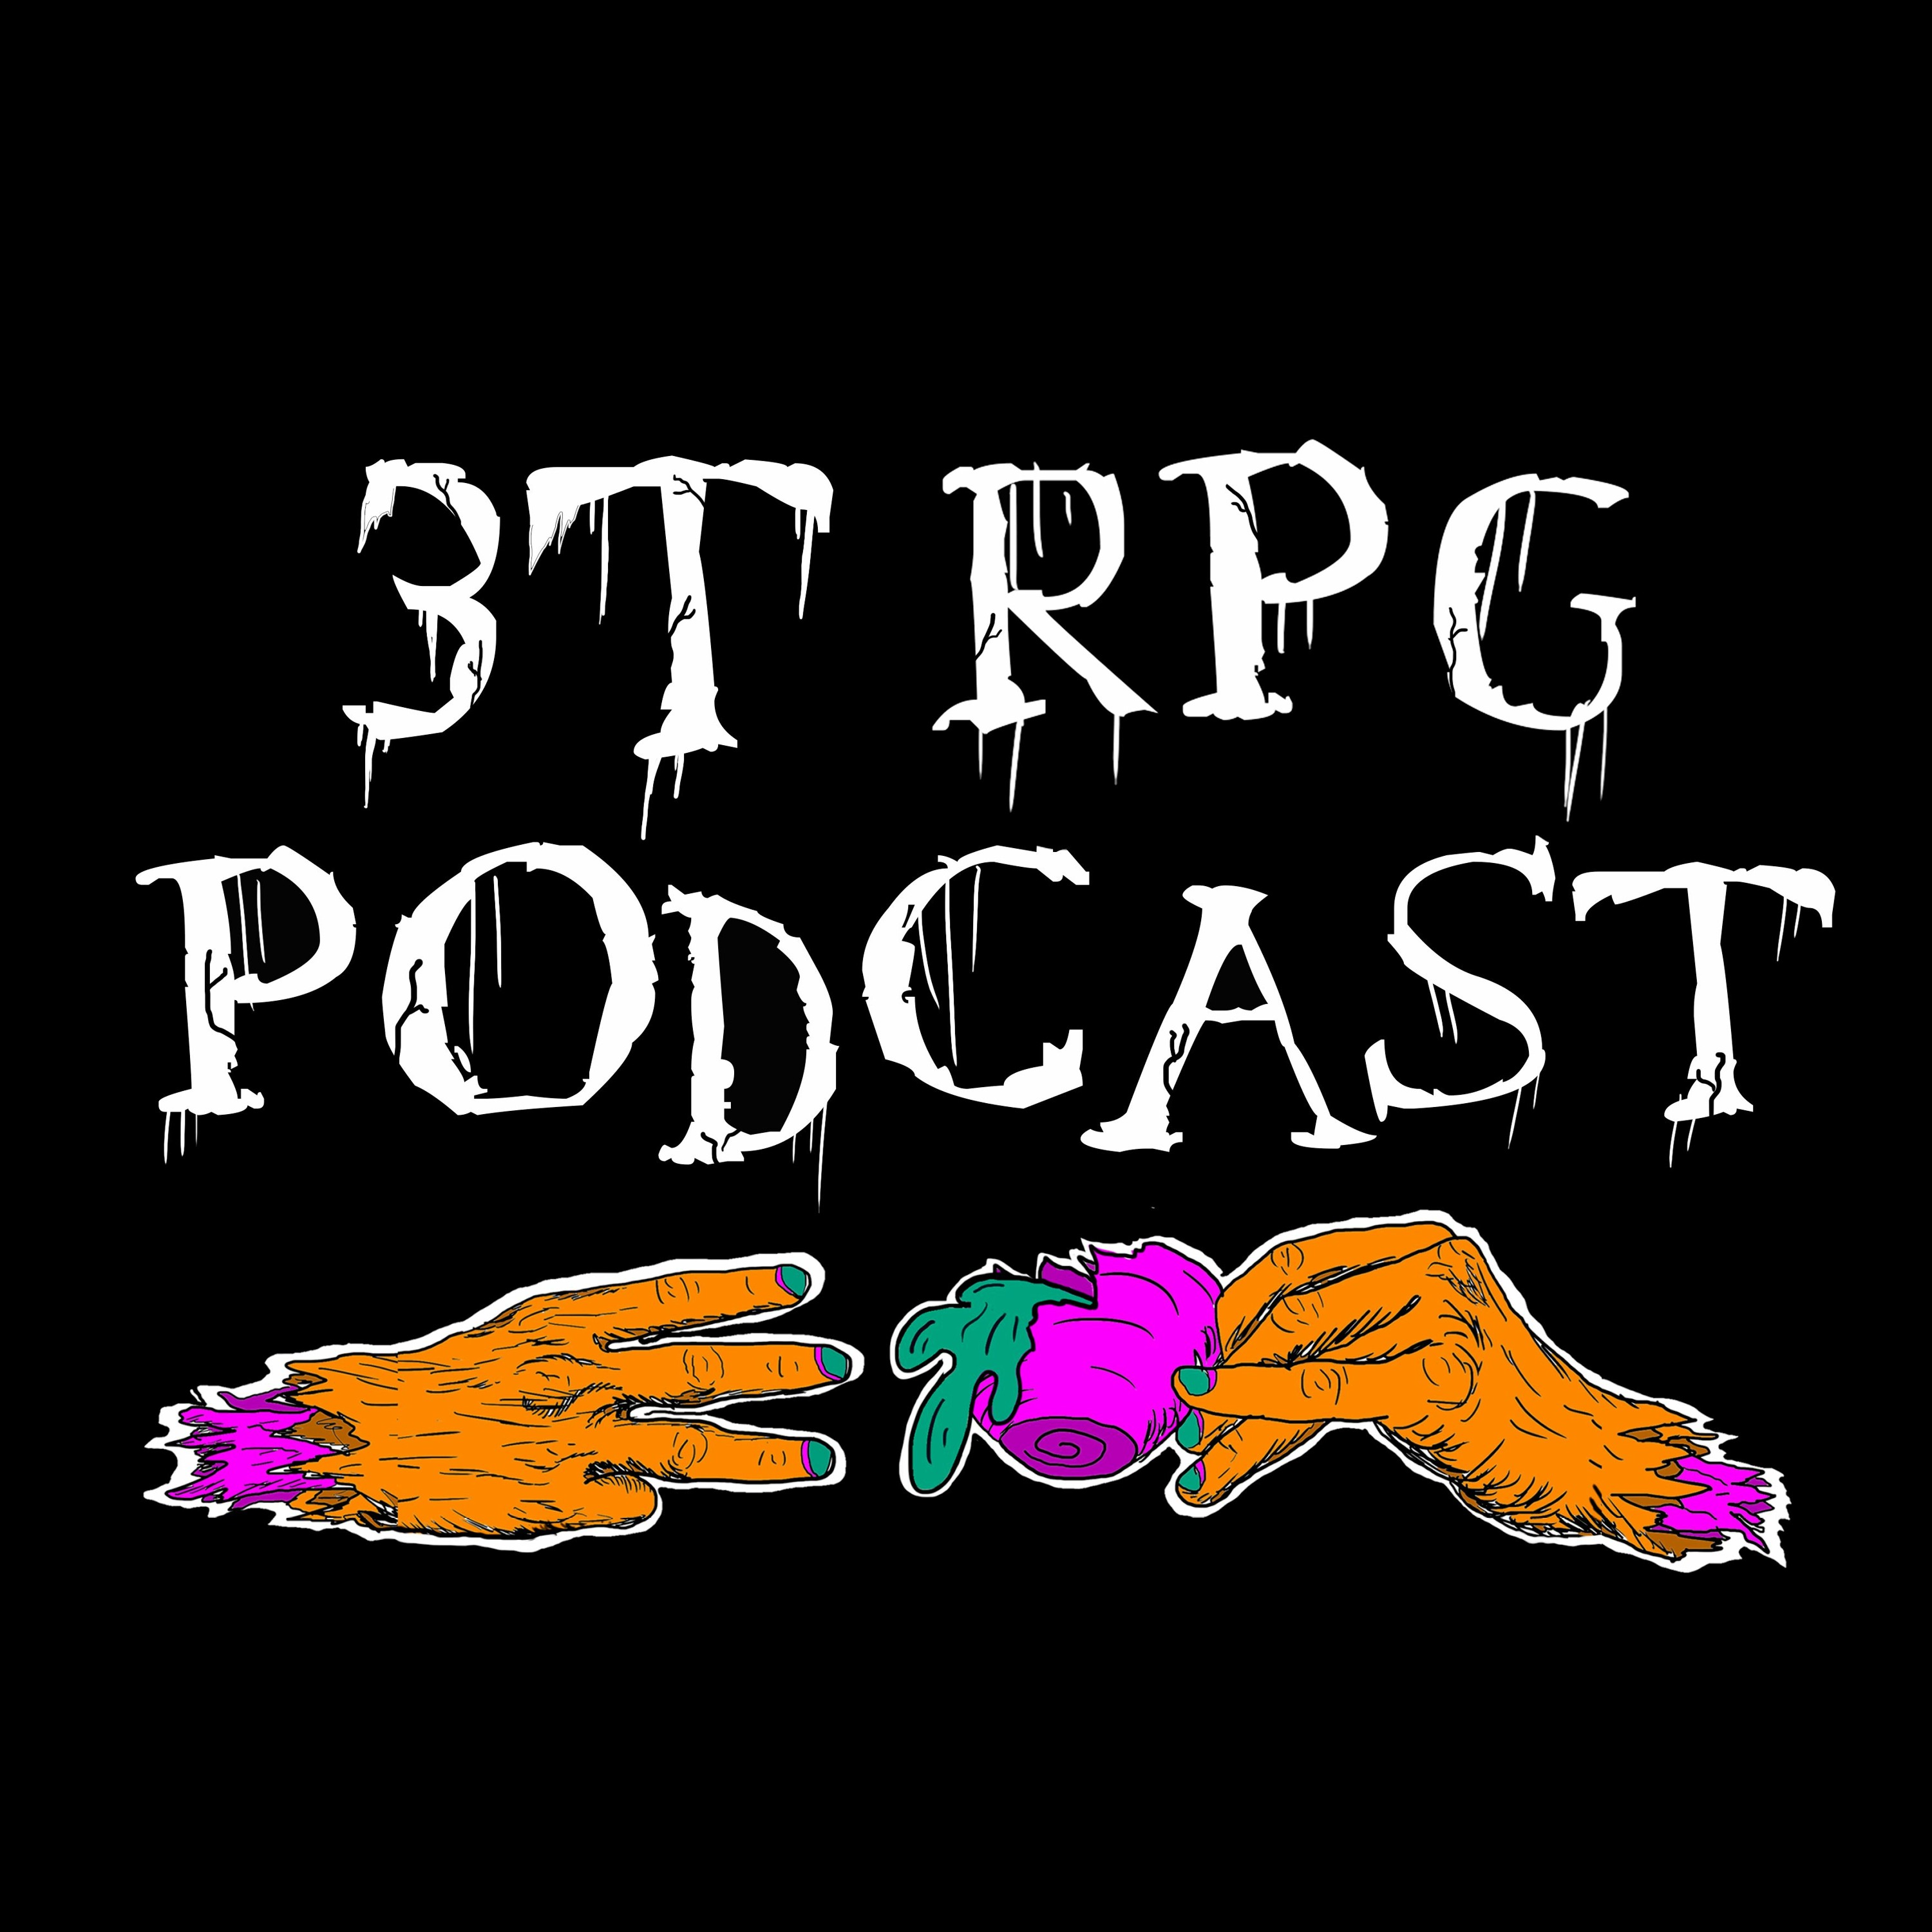 082 - The RPG where you play as a sentient pile of trash